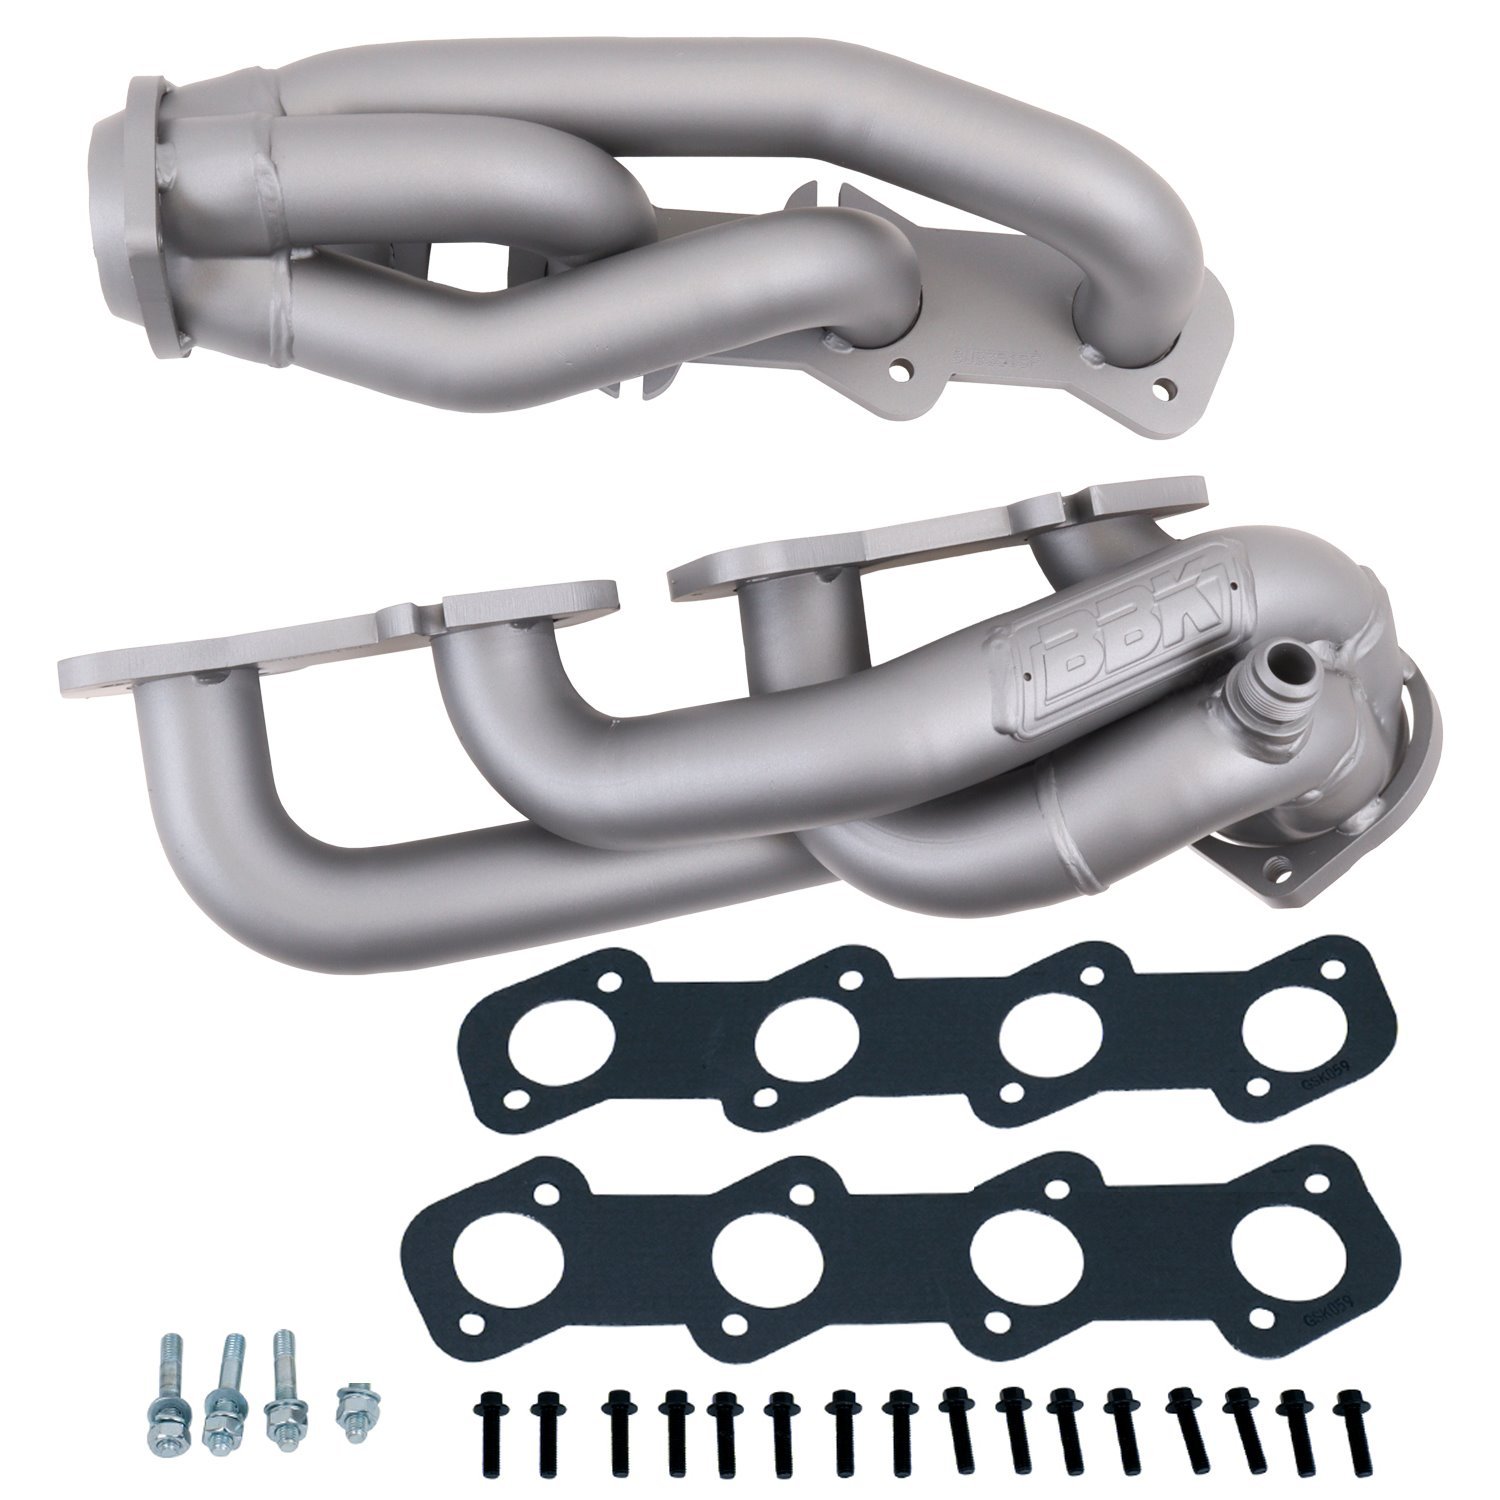 Shorty Exhaust Headers 1997-2003 Ford F-150/Expedition 4.6L [Titanium Ceramic Finish]